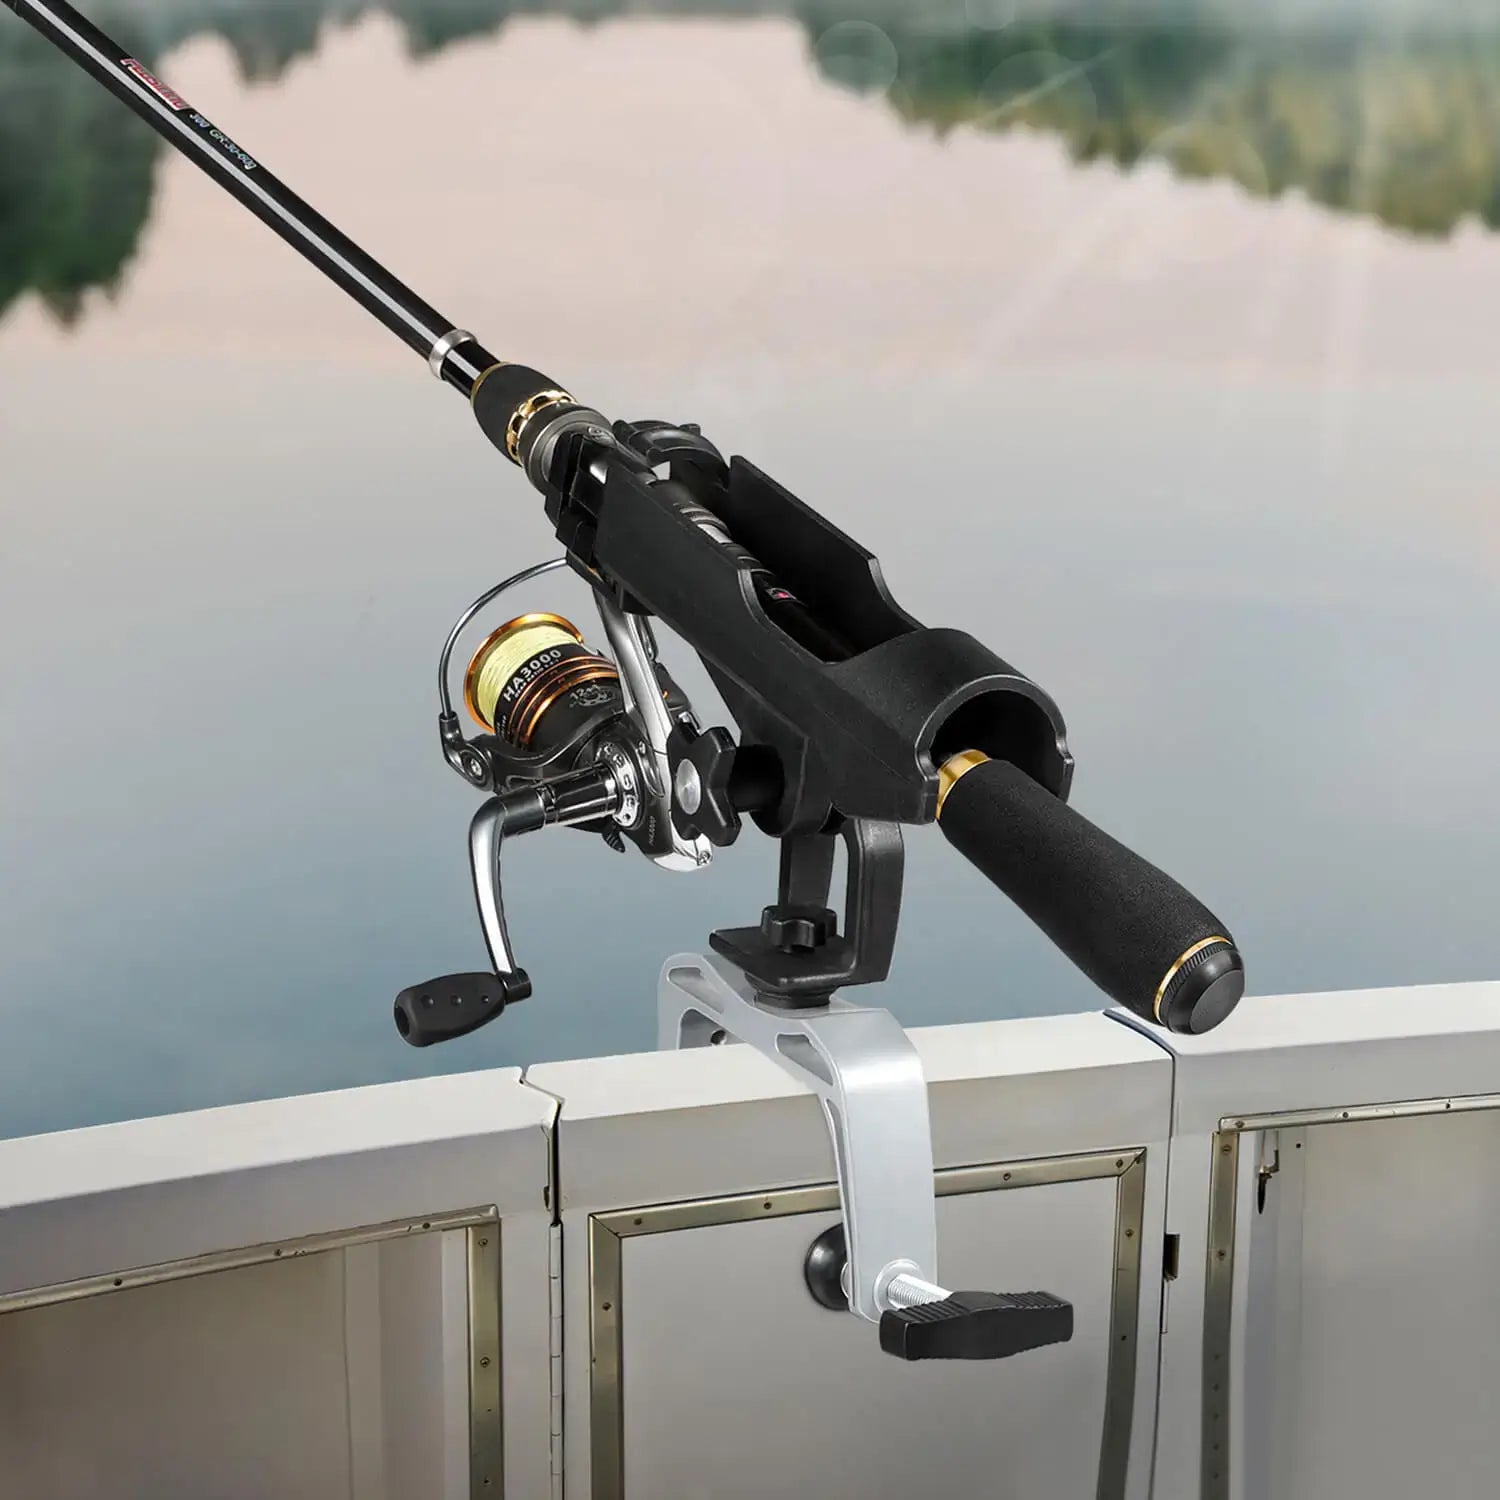 Top-Rated Rod Holders for Different Types of Boats and Fishing